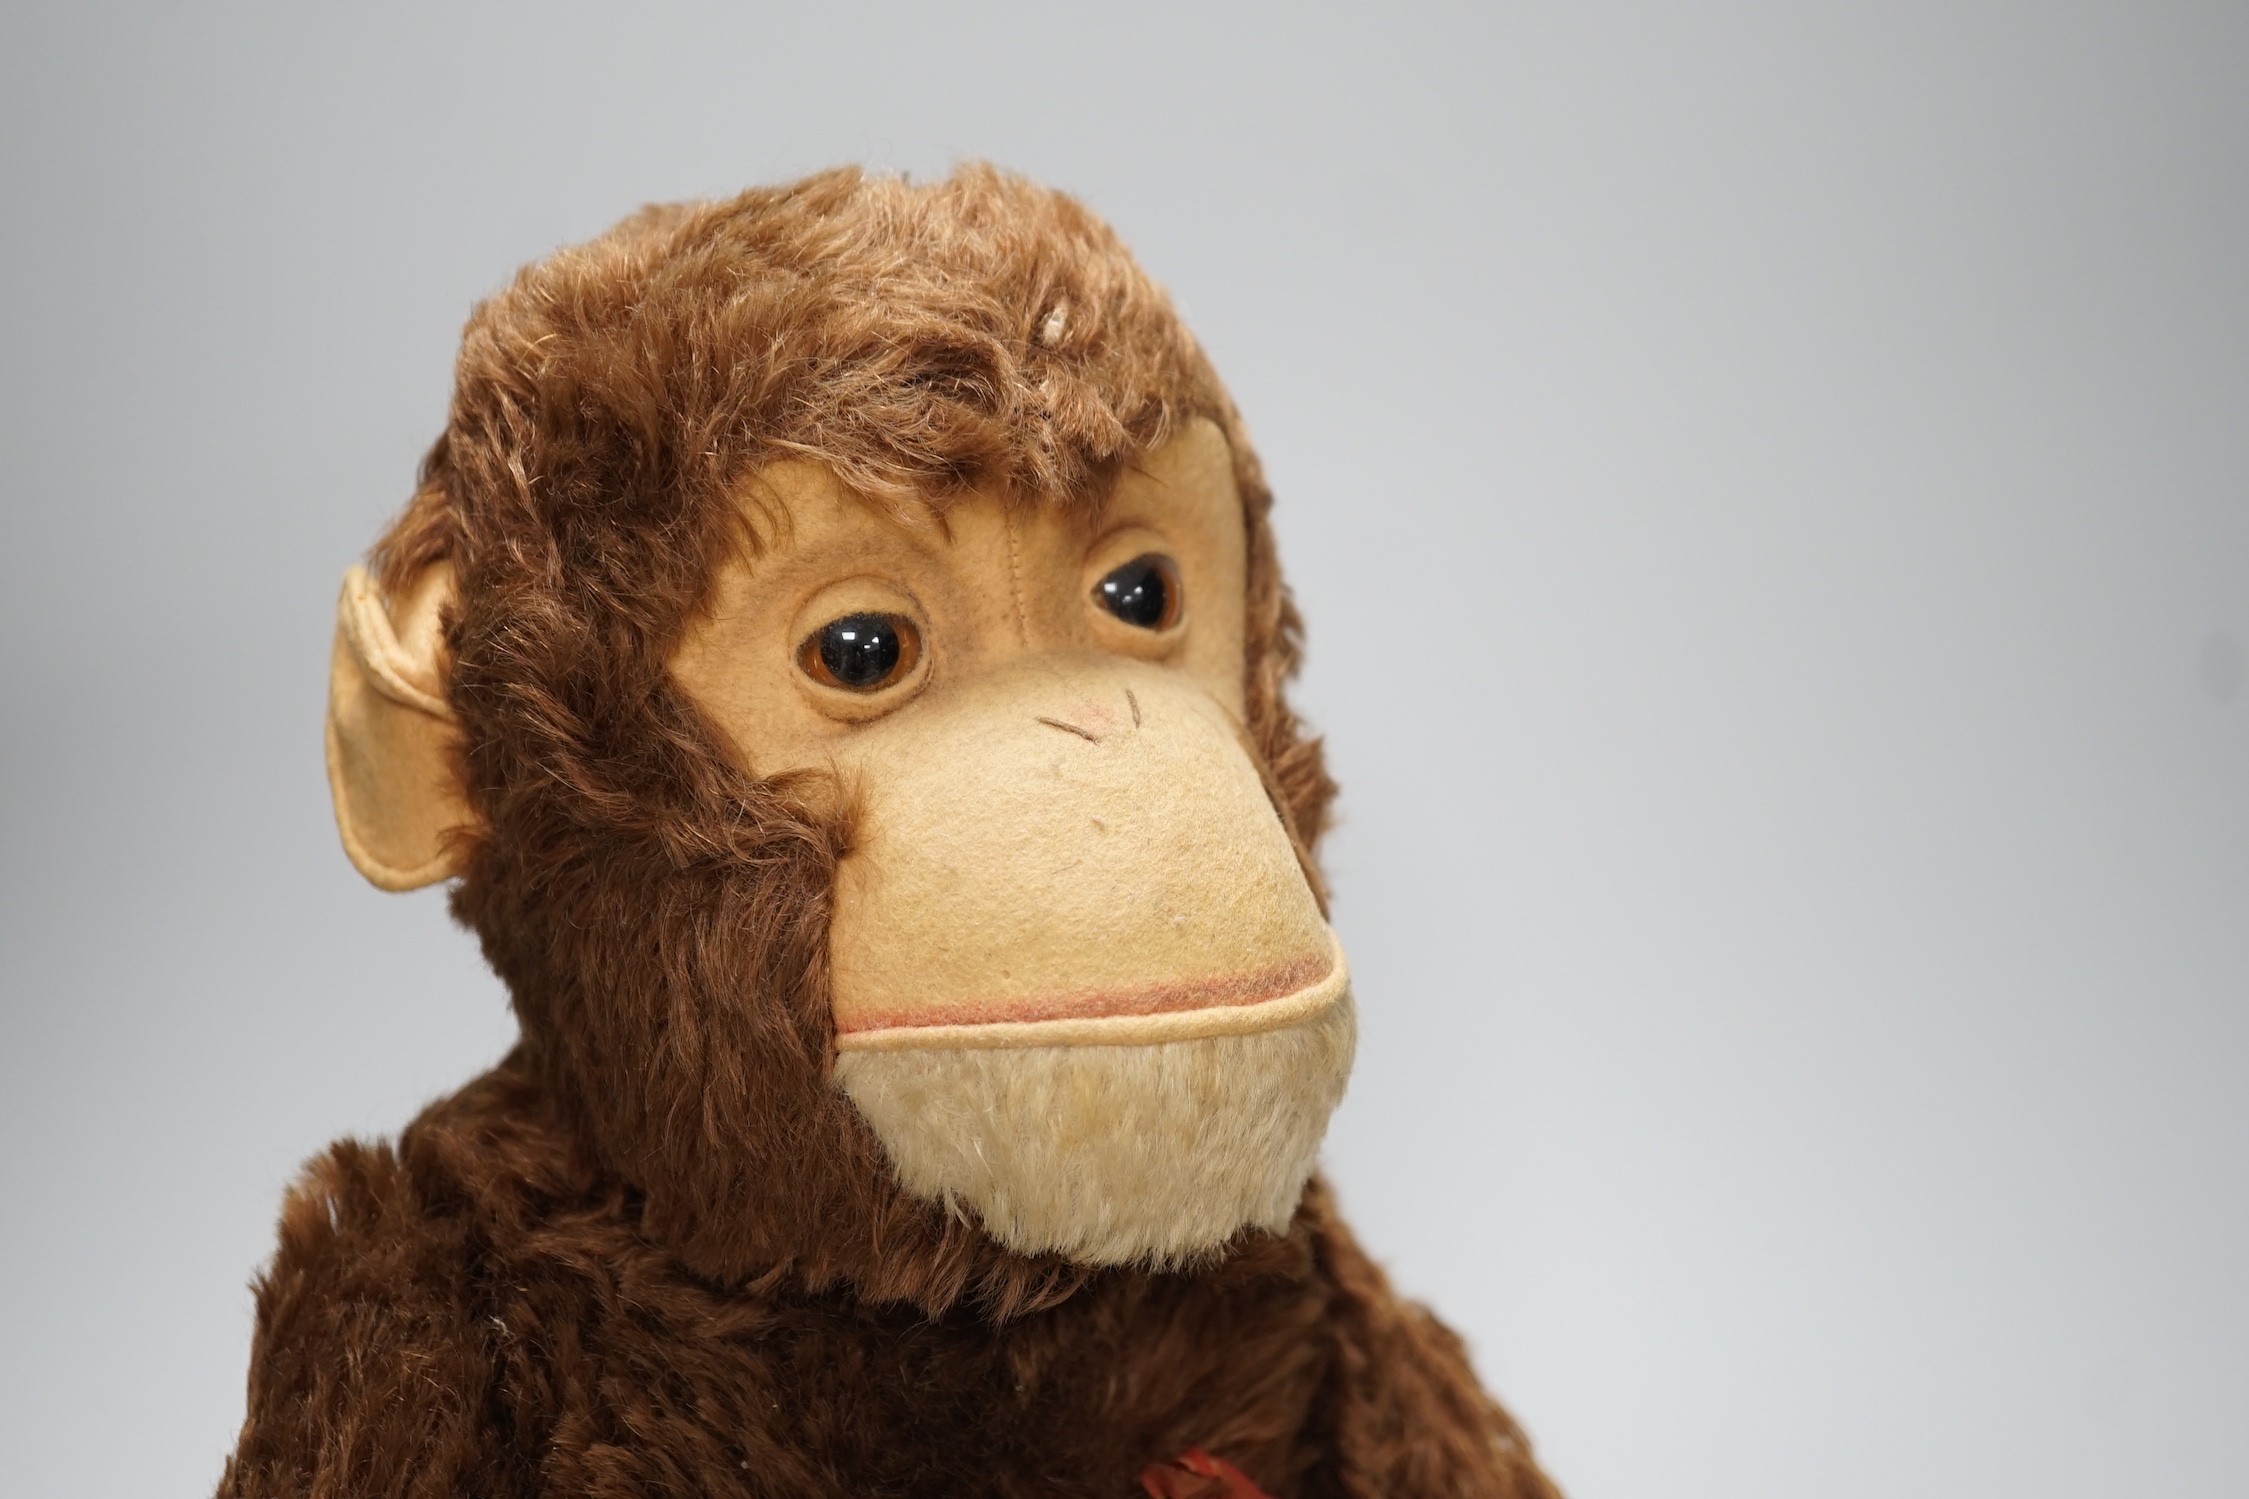 A Schuco 'Yes No' Tricky mohair monkey, 51cm